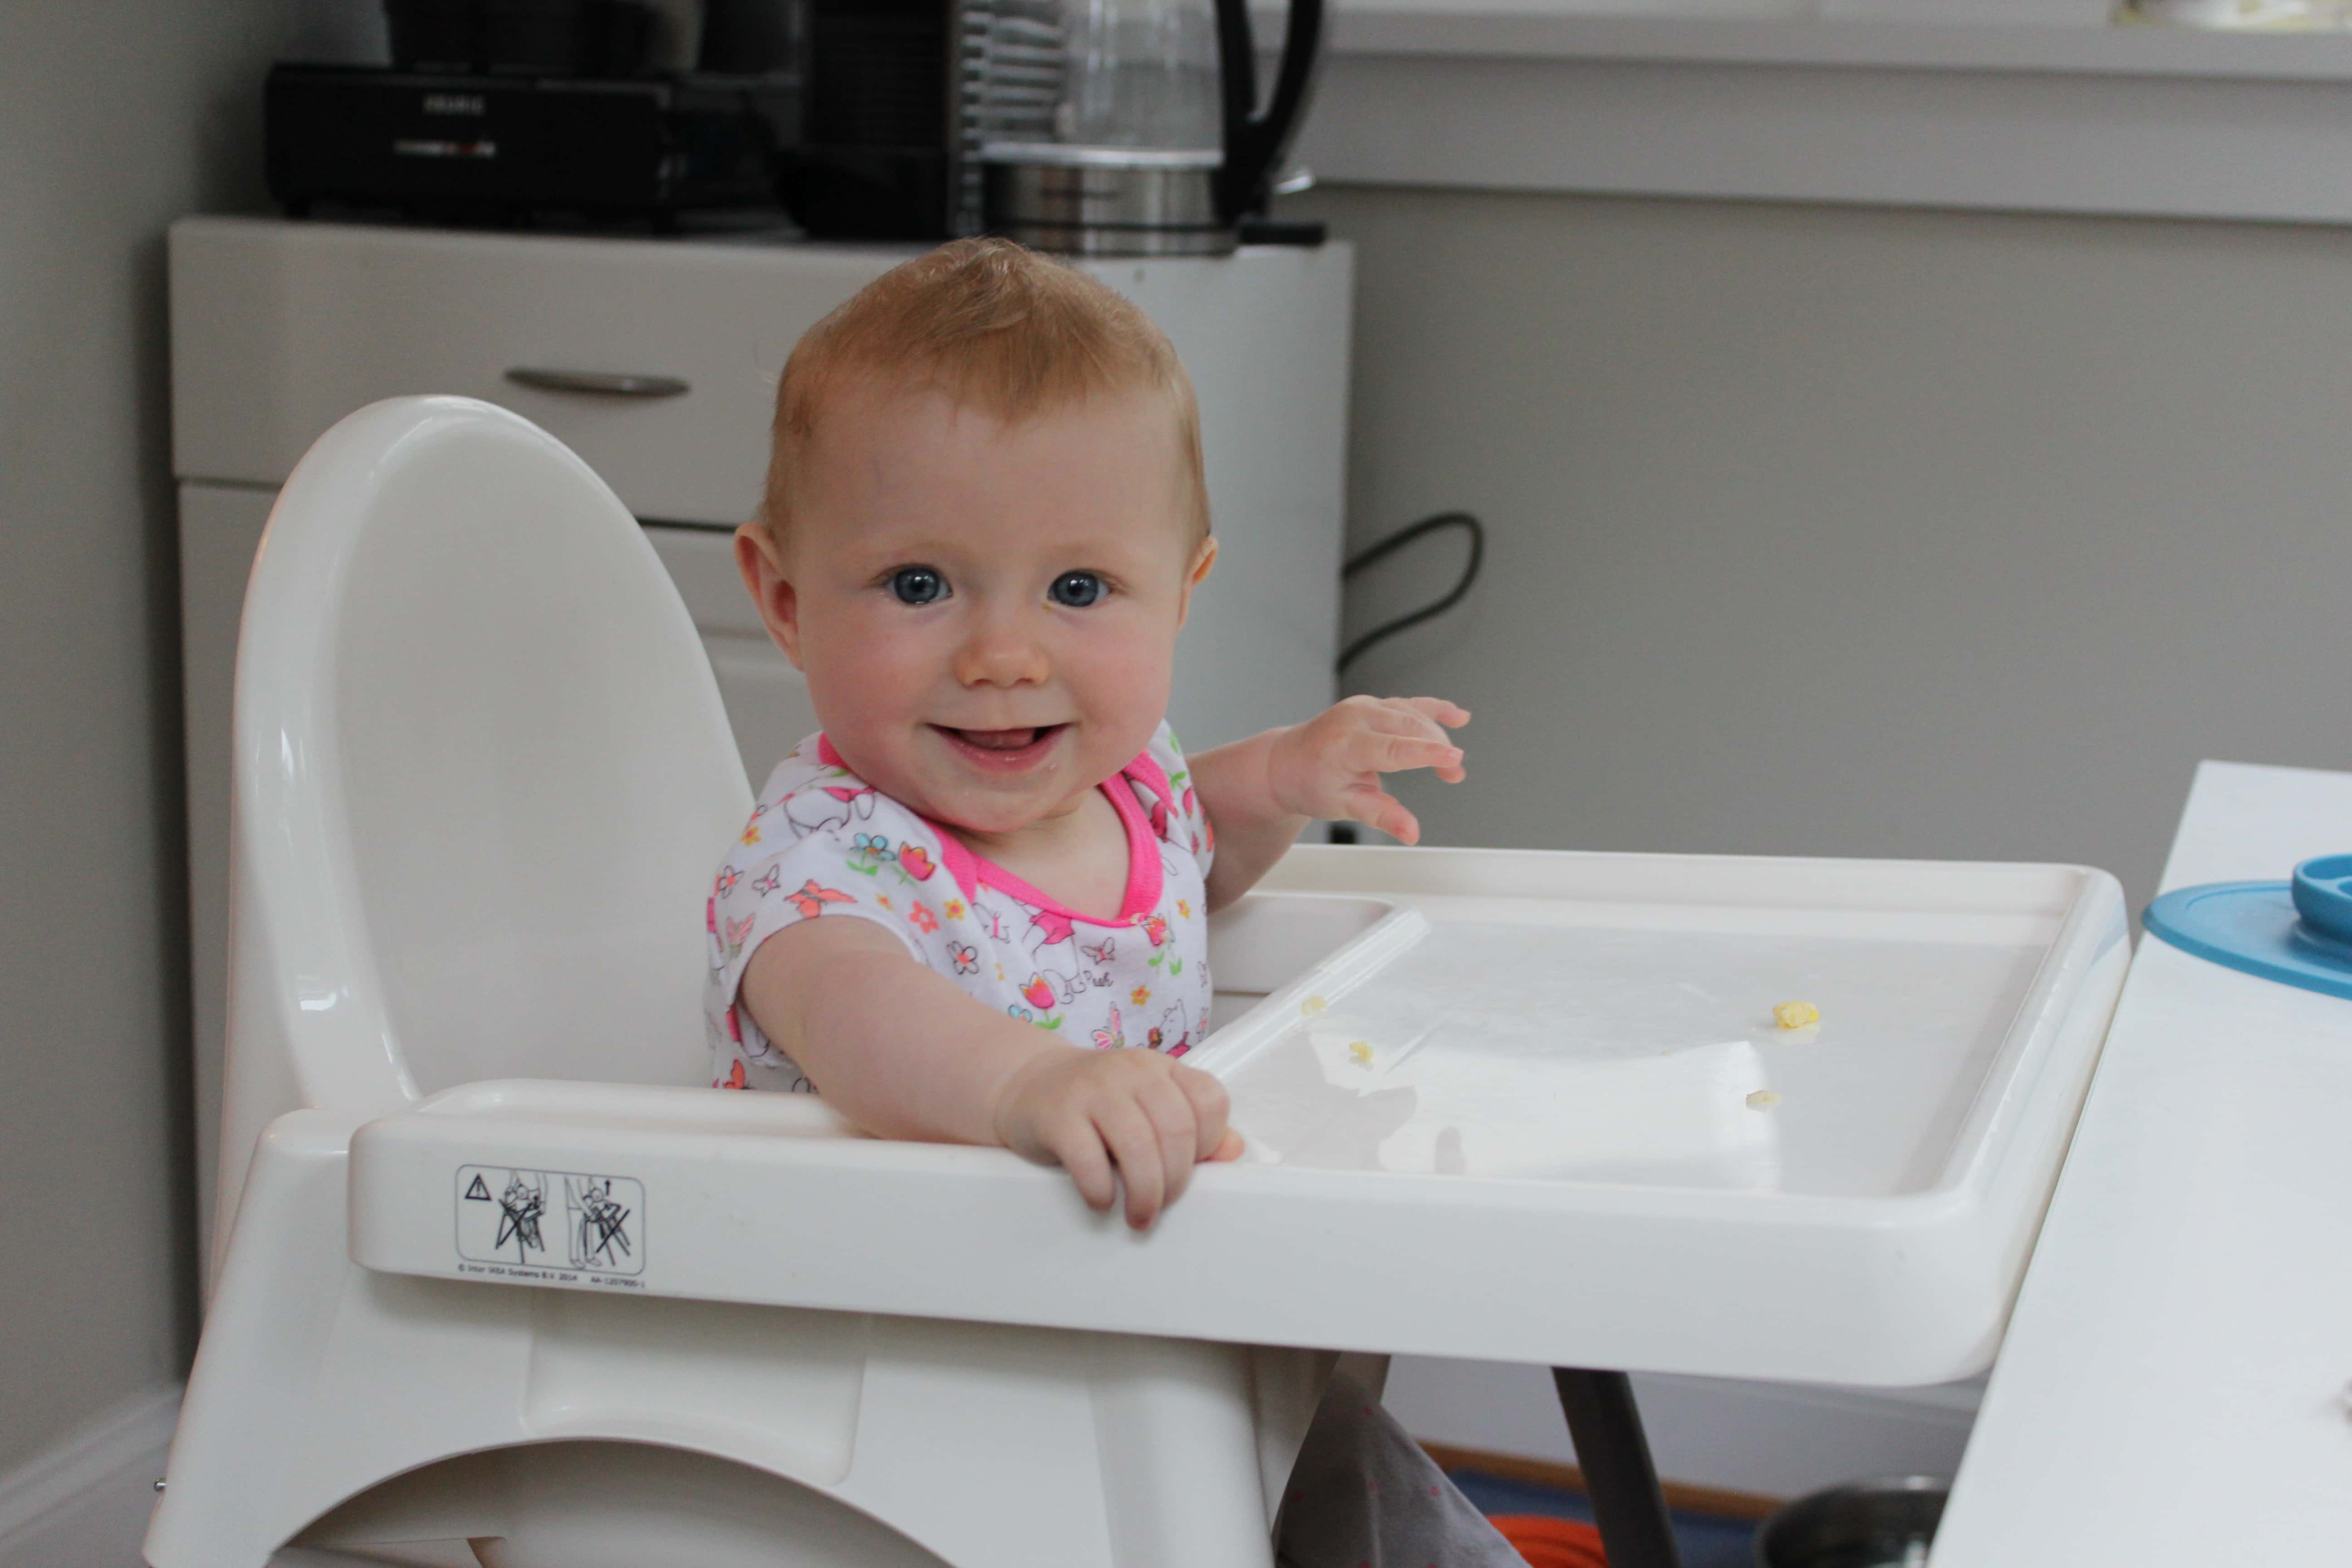 My Favourite Products for Baby-Led Weaning